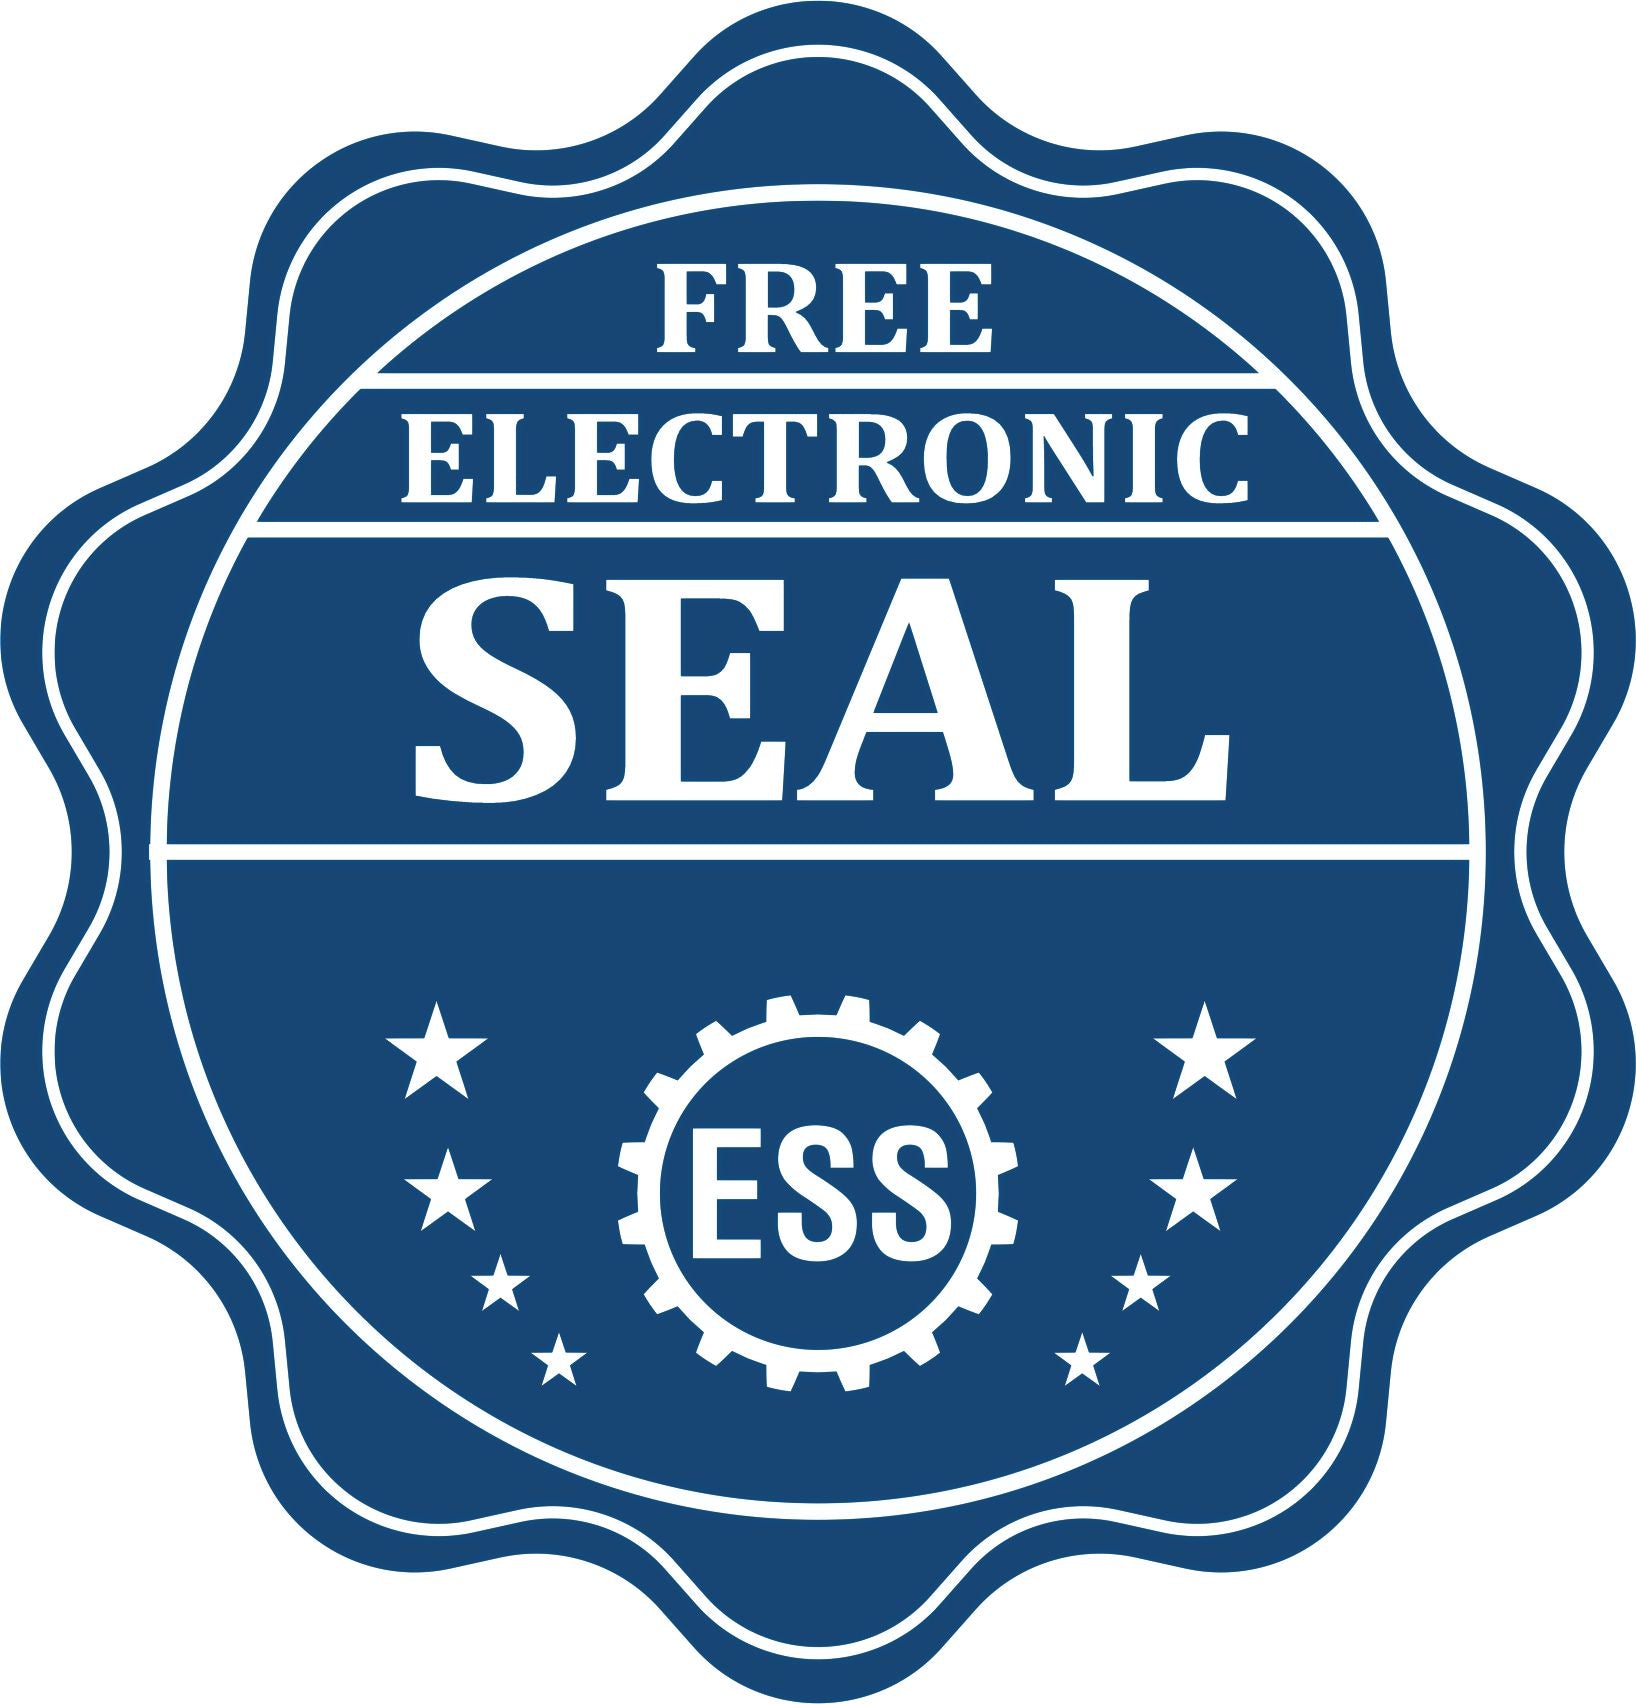 A badge showing a free electronic seal for the Soft Illinois Professional Engineer Seal with stars and the ESS gear on the emblem.